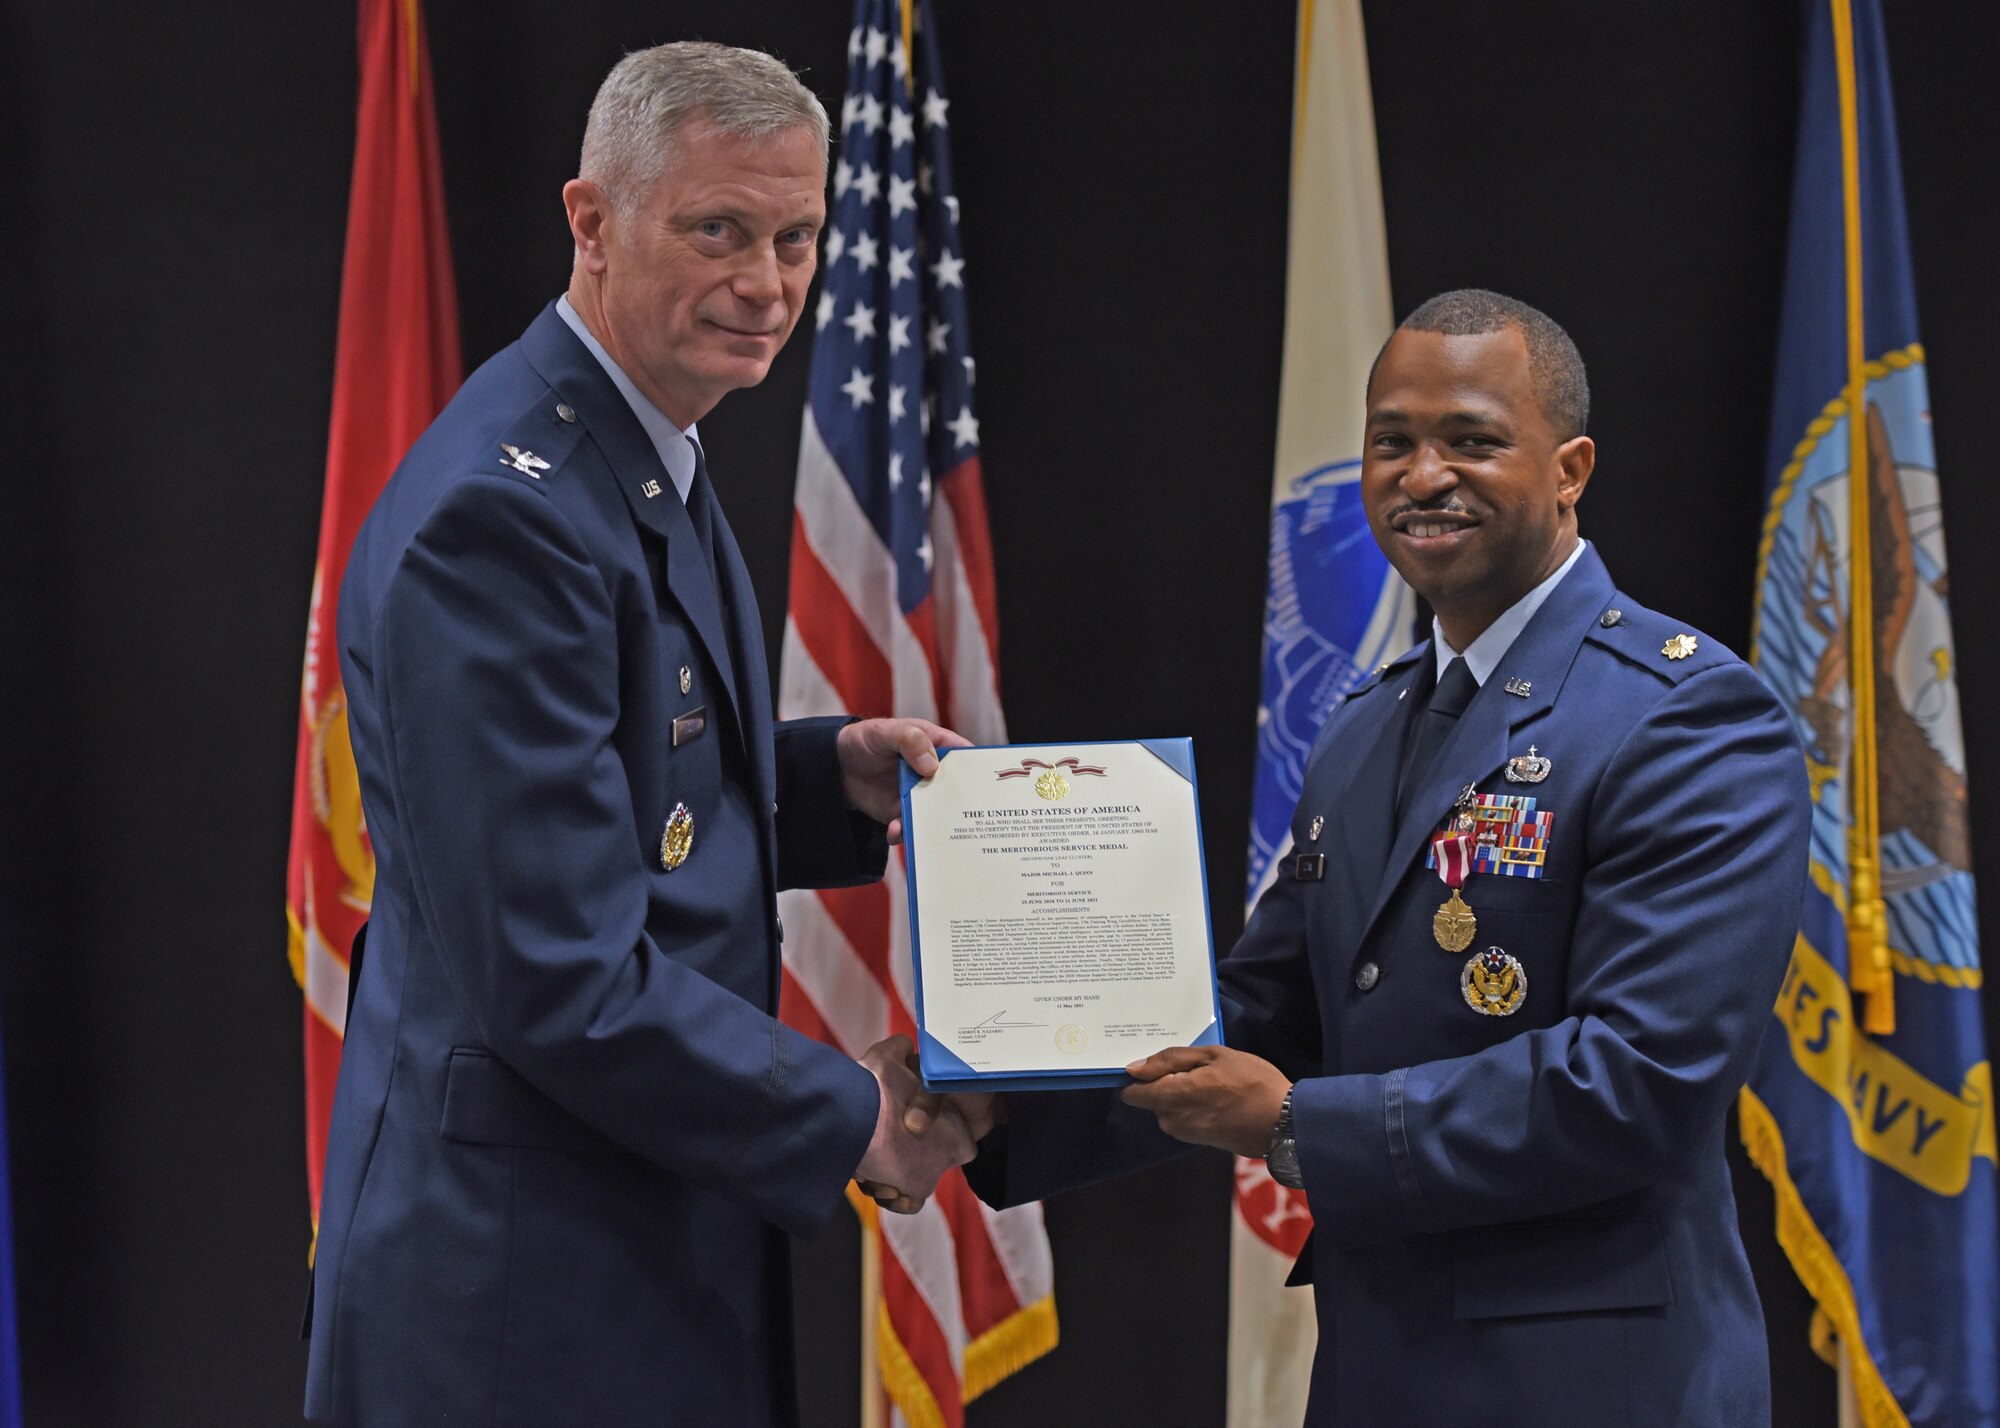 U.S. Air Force Col. Tony England, 17th Mission Support Group commander, presents Maj. Michael Quinn, 17th Contracting Squadron outgoing commander, the Meritorious Service Medal during the 17th CONS change of command ceremony at the Event Center, June 21, 2021. Quinn was decorated for overseeing $43 million in contracts to support the training, development, and education for over 14 thousand joint service students. (U.S. Air Force photo by Senior Airman Abbey Rieves)